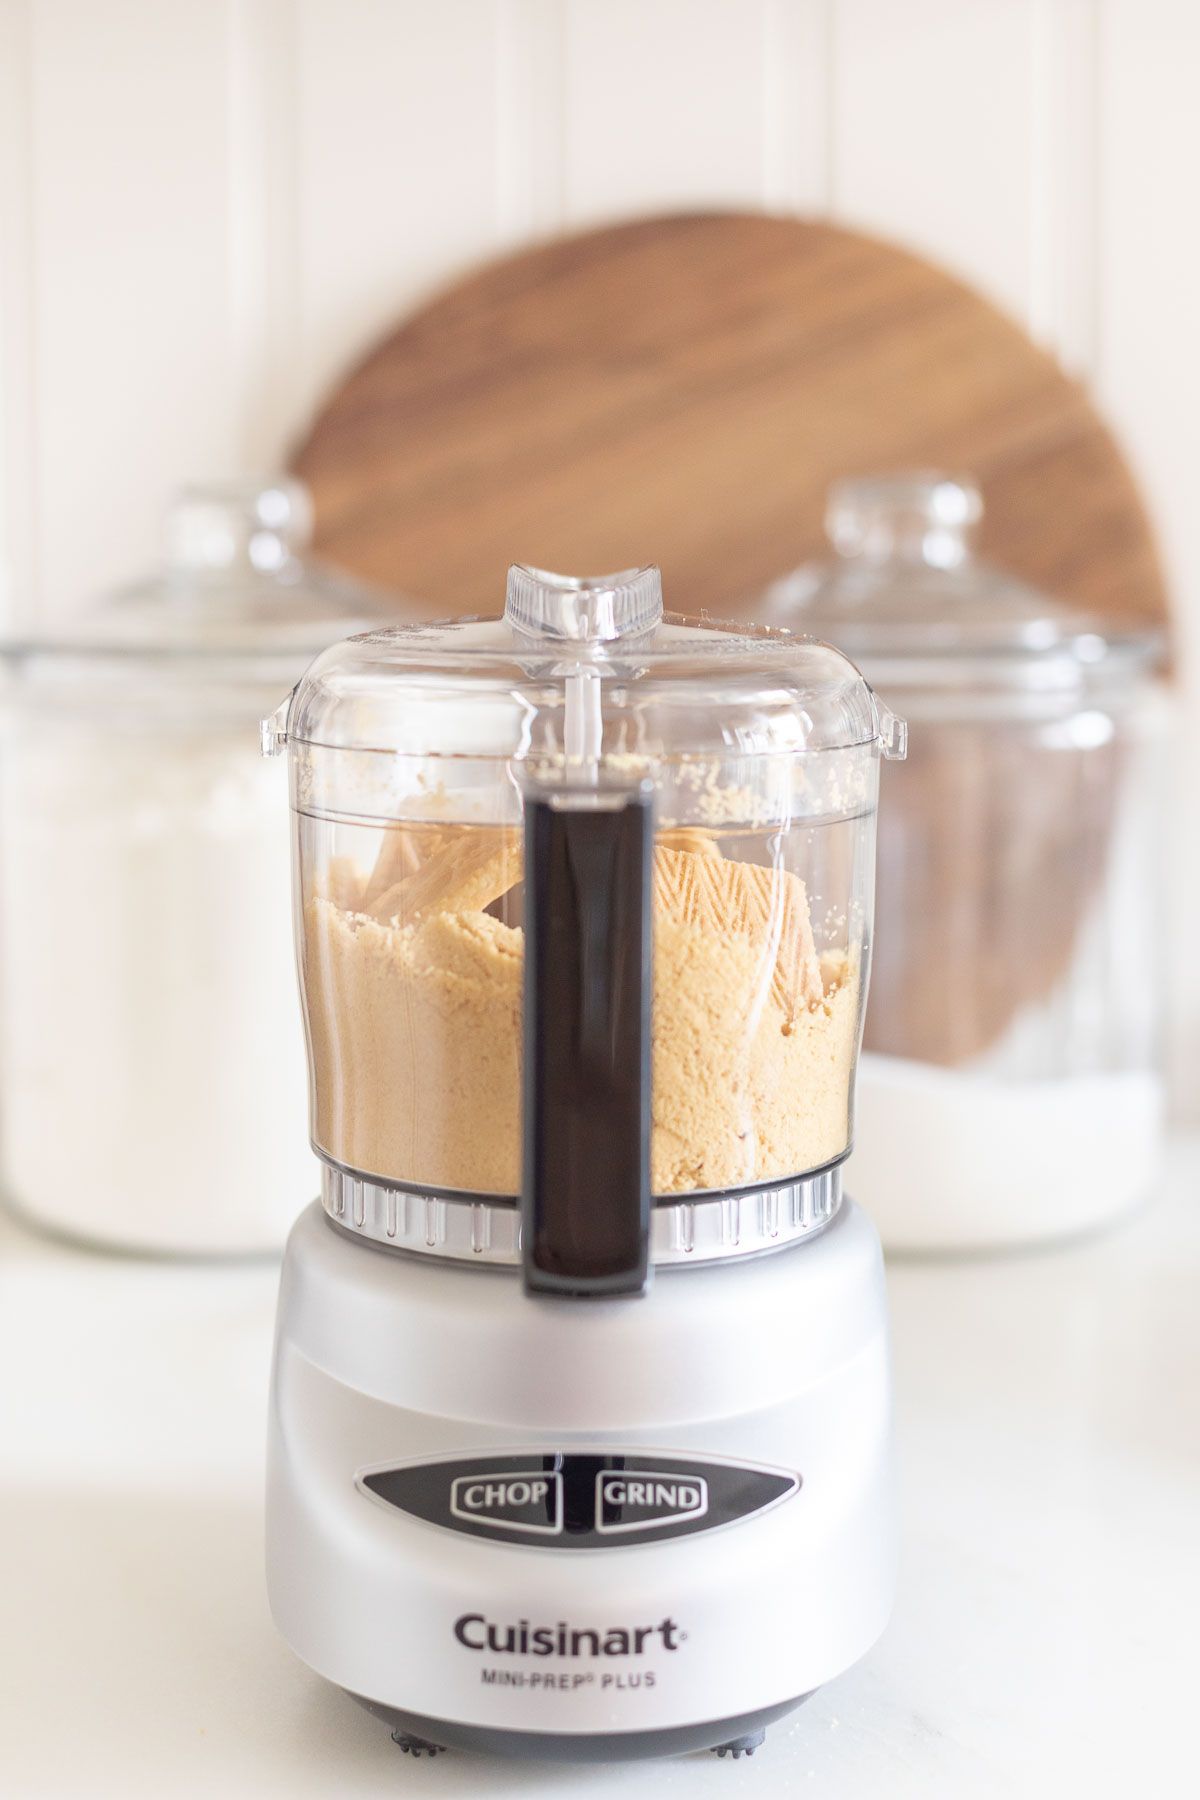 A small food processor filled with shortbread crust ingredients